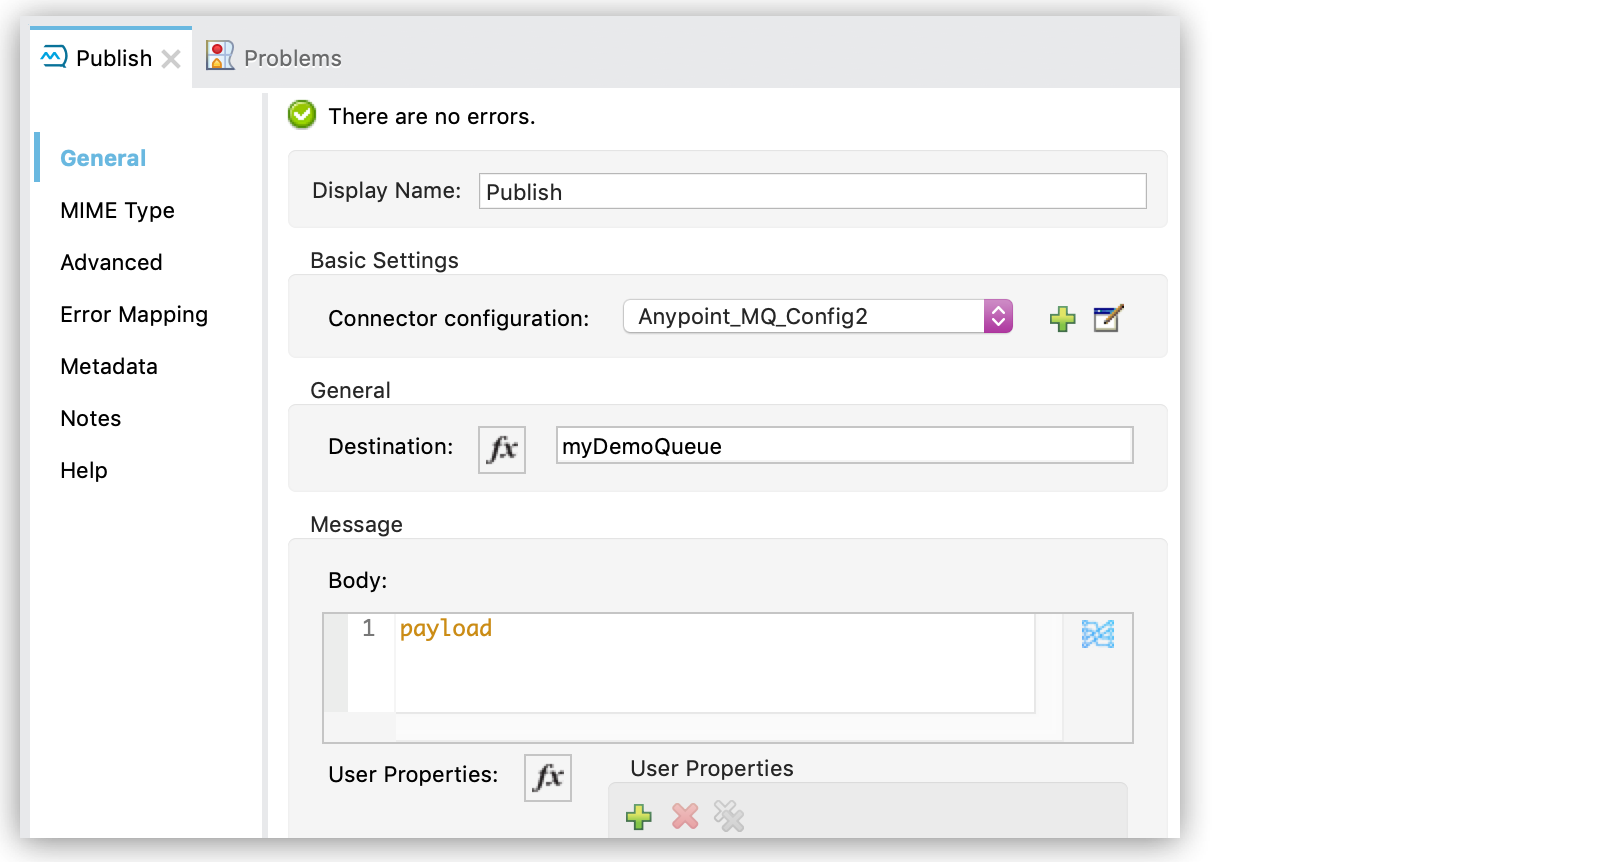 Destination property and Add icon for the Publish operation